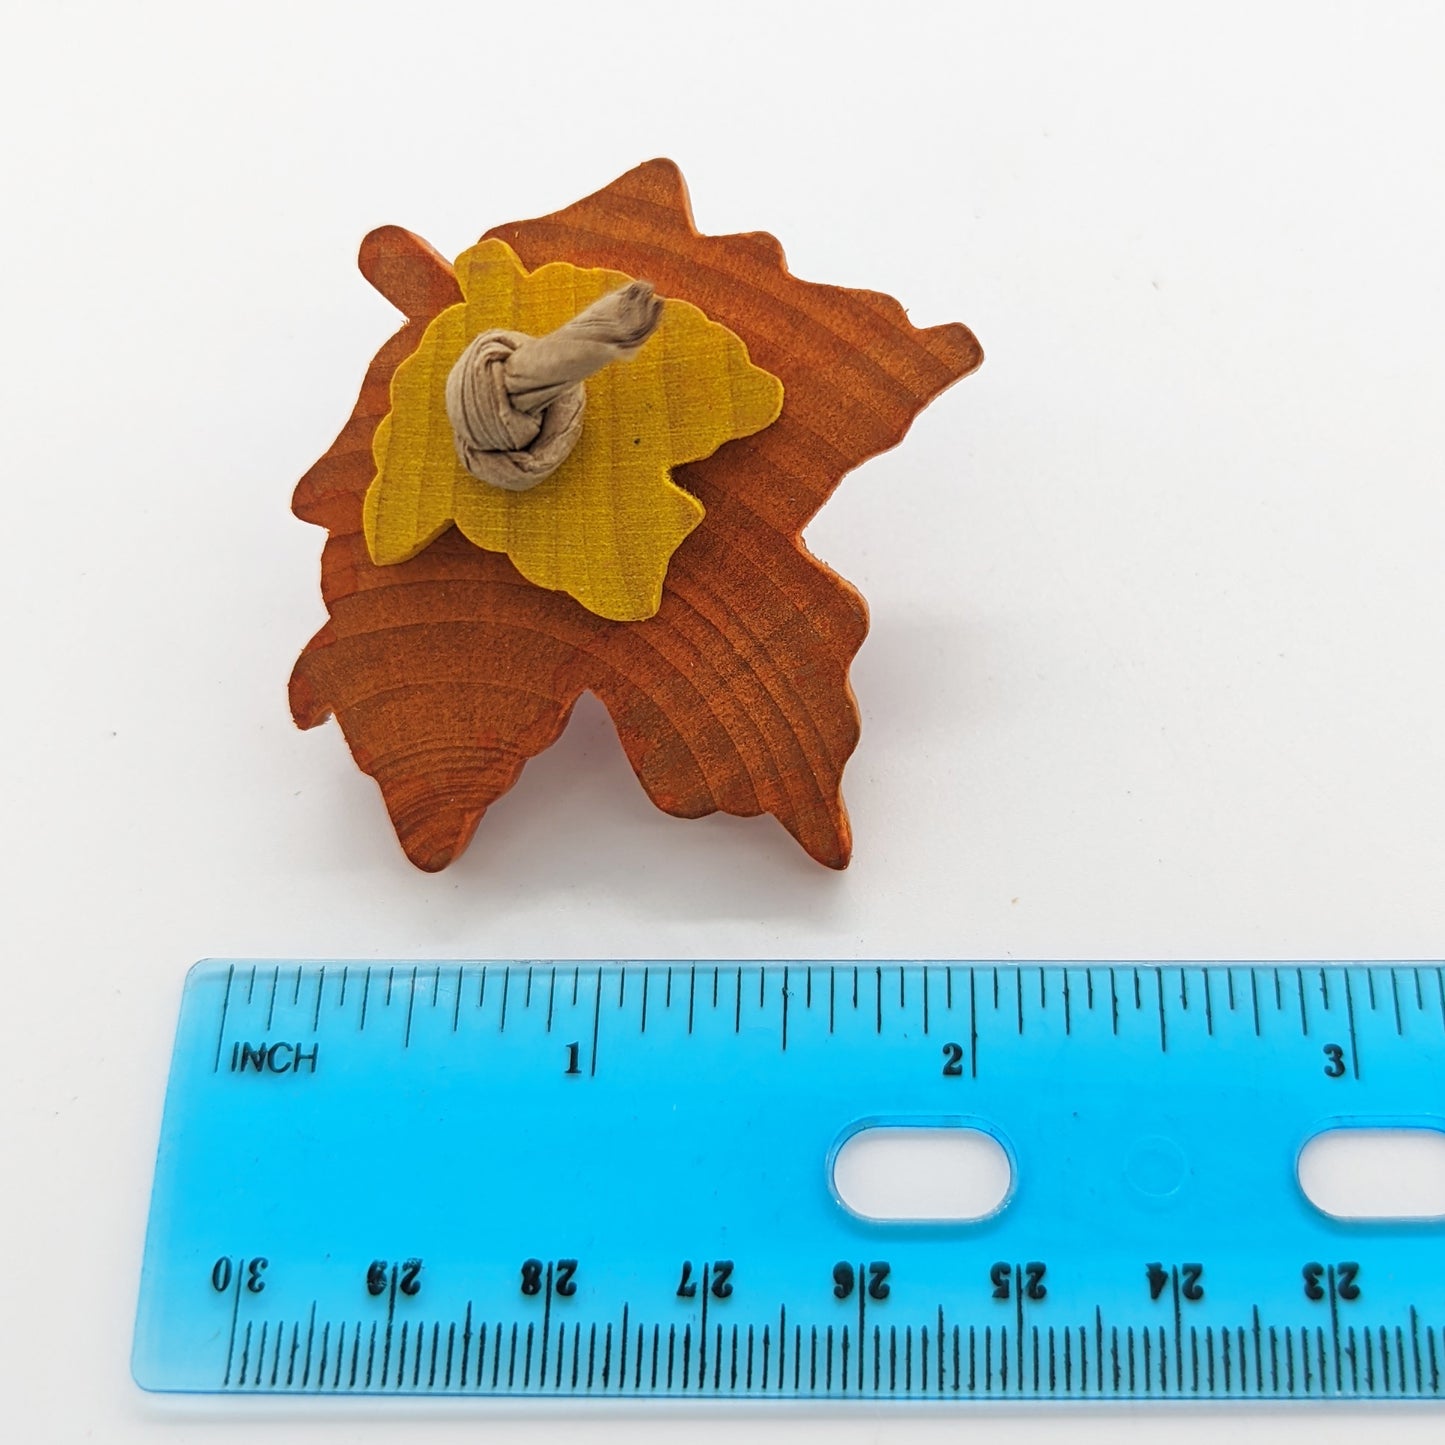 A orange wooden maple leaf bird toy, with a smaller yellow maple leaf tied on it with paper rope. Shown with a ruler to show size (about two inches wide). 